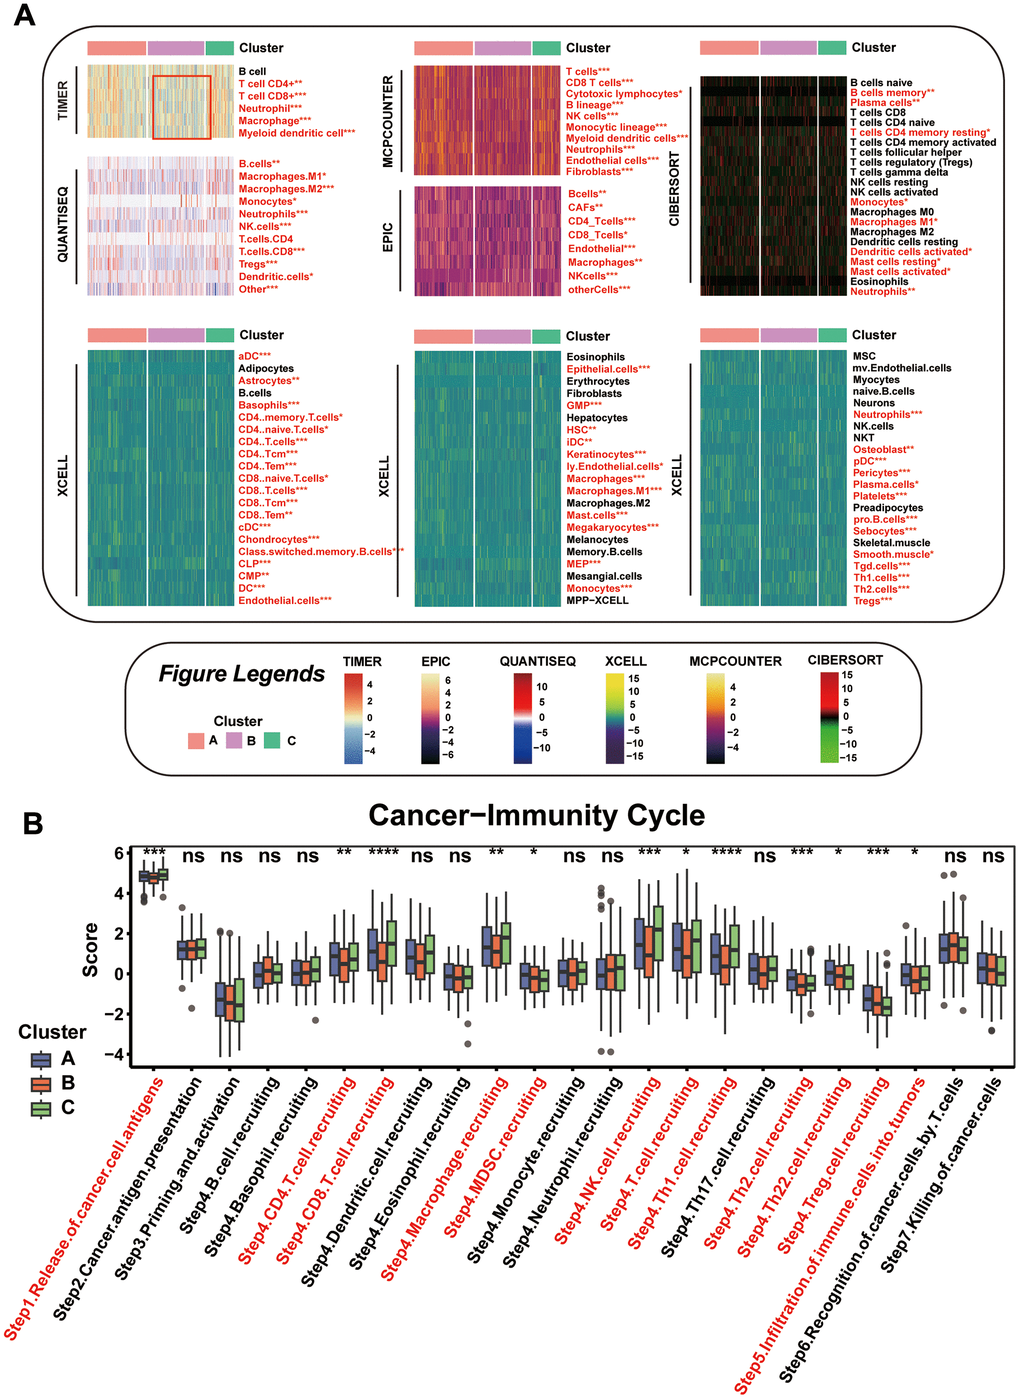 Comparison of the Specific Immune Infiltration Landscape among Three Subgroups. (A) Heatmap of immune cell infiltration among the subtypes. (B) Boxplot of cancer immunity cycle in three mitophagy modification subtypes. Statistical significance denoted as ****p p p p 